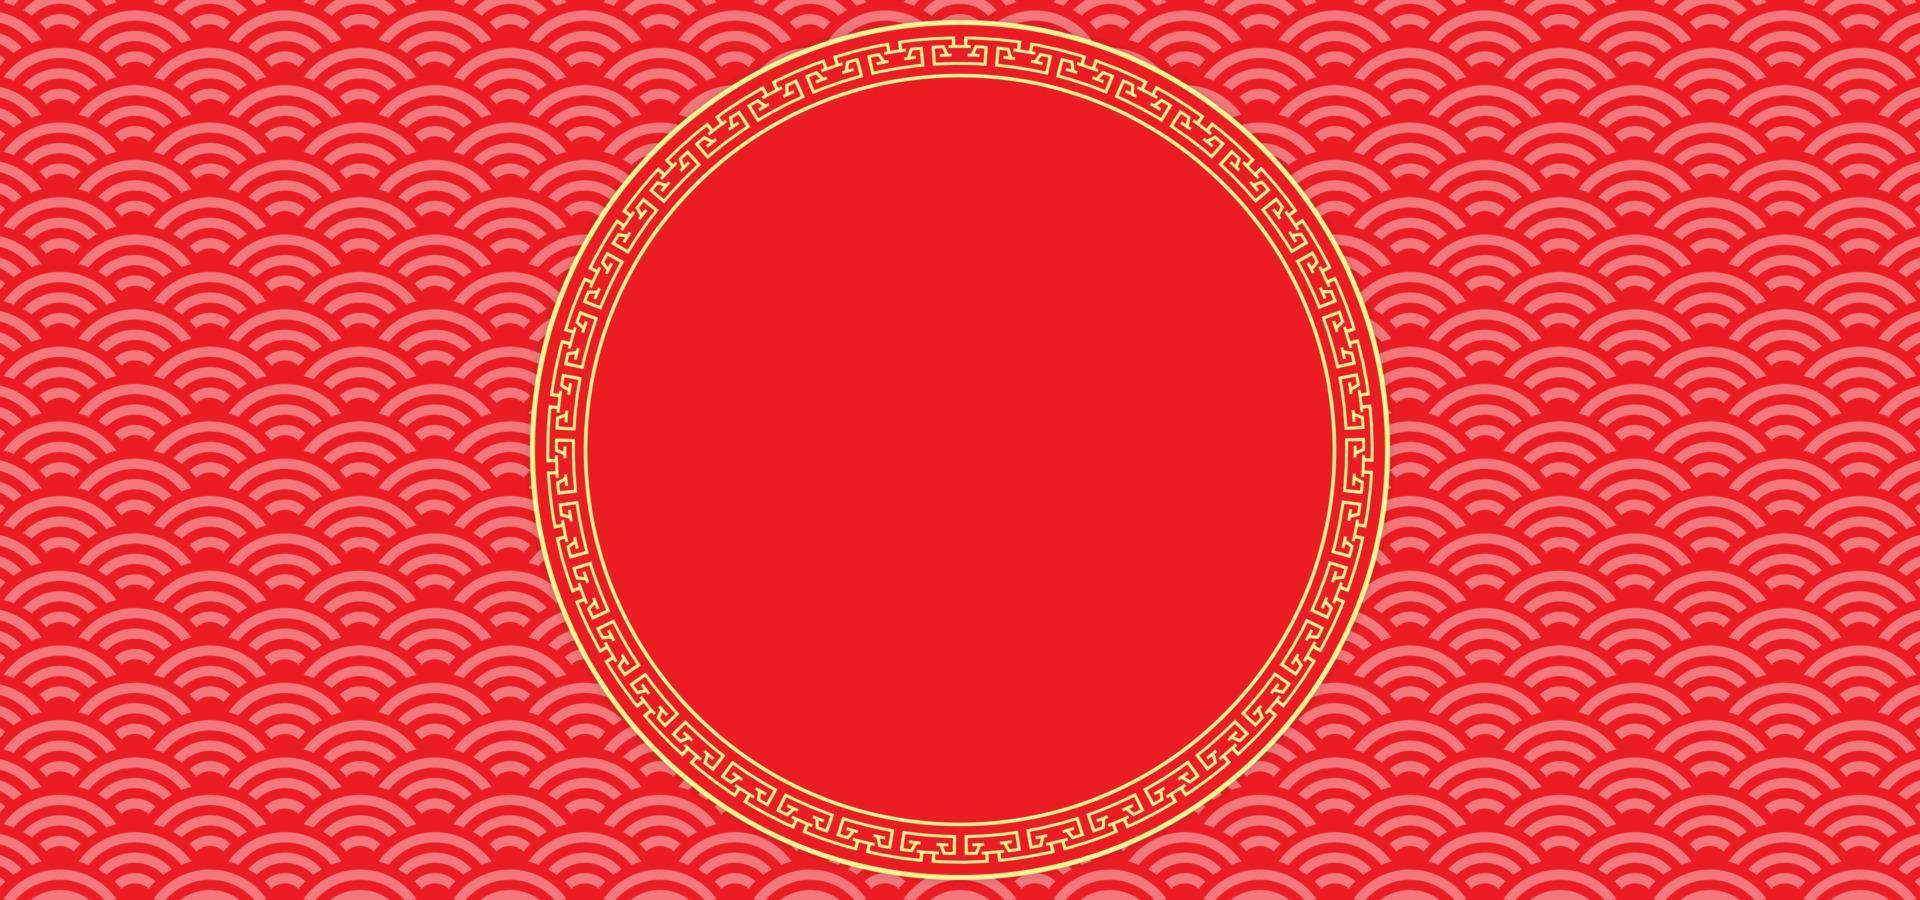 Chinese New Year Background with blank space for text. Red and gold background theme with pattern texture and ornament. Vector illustration